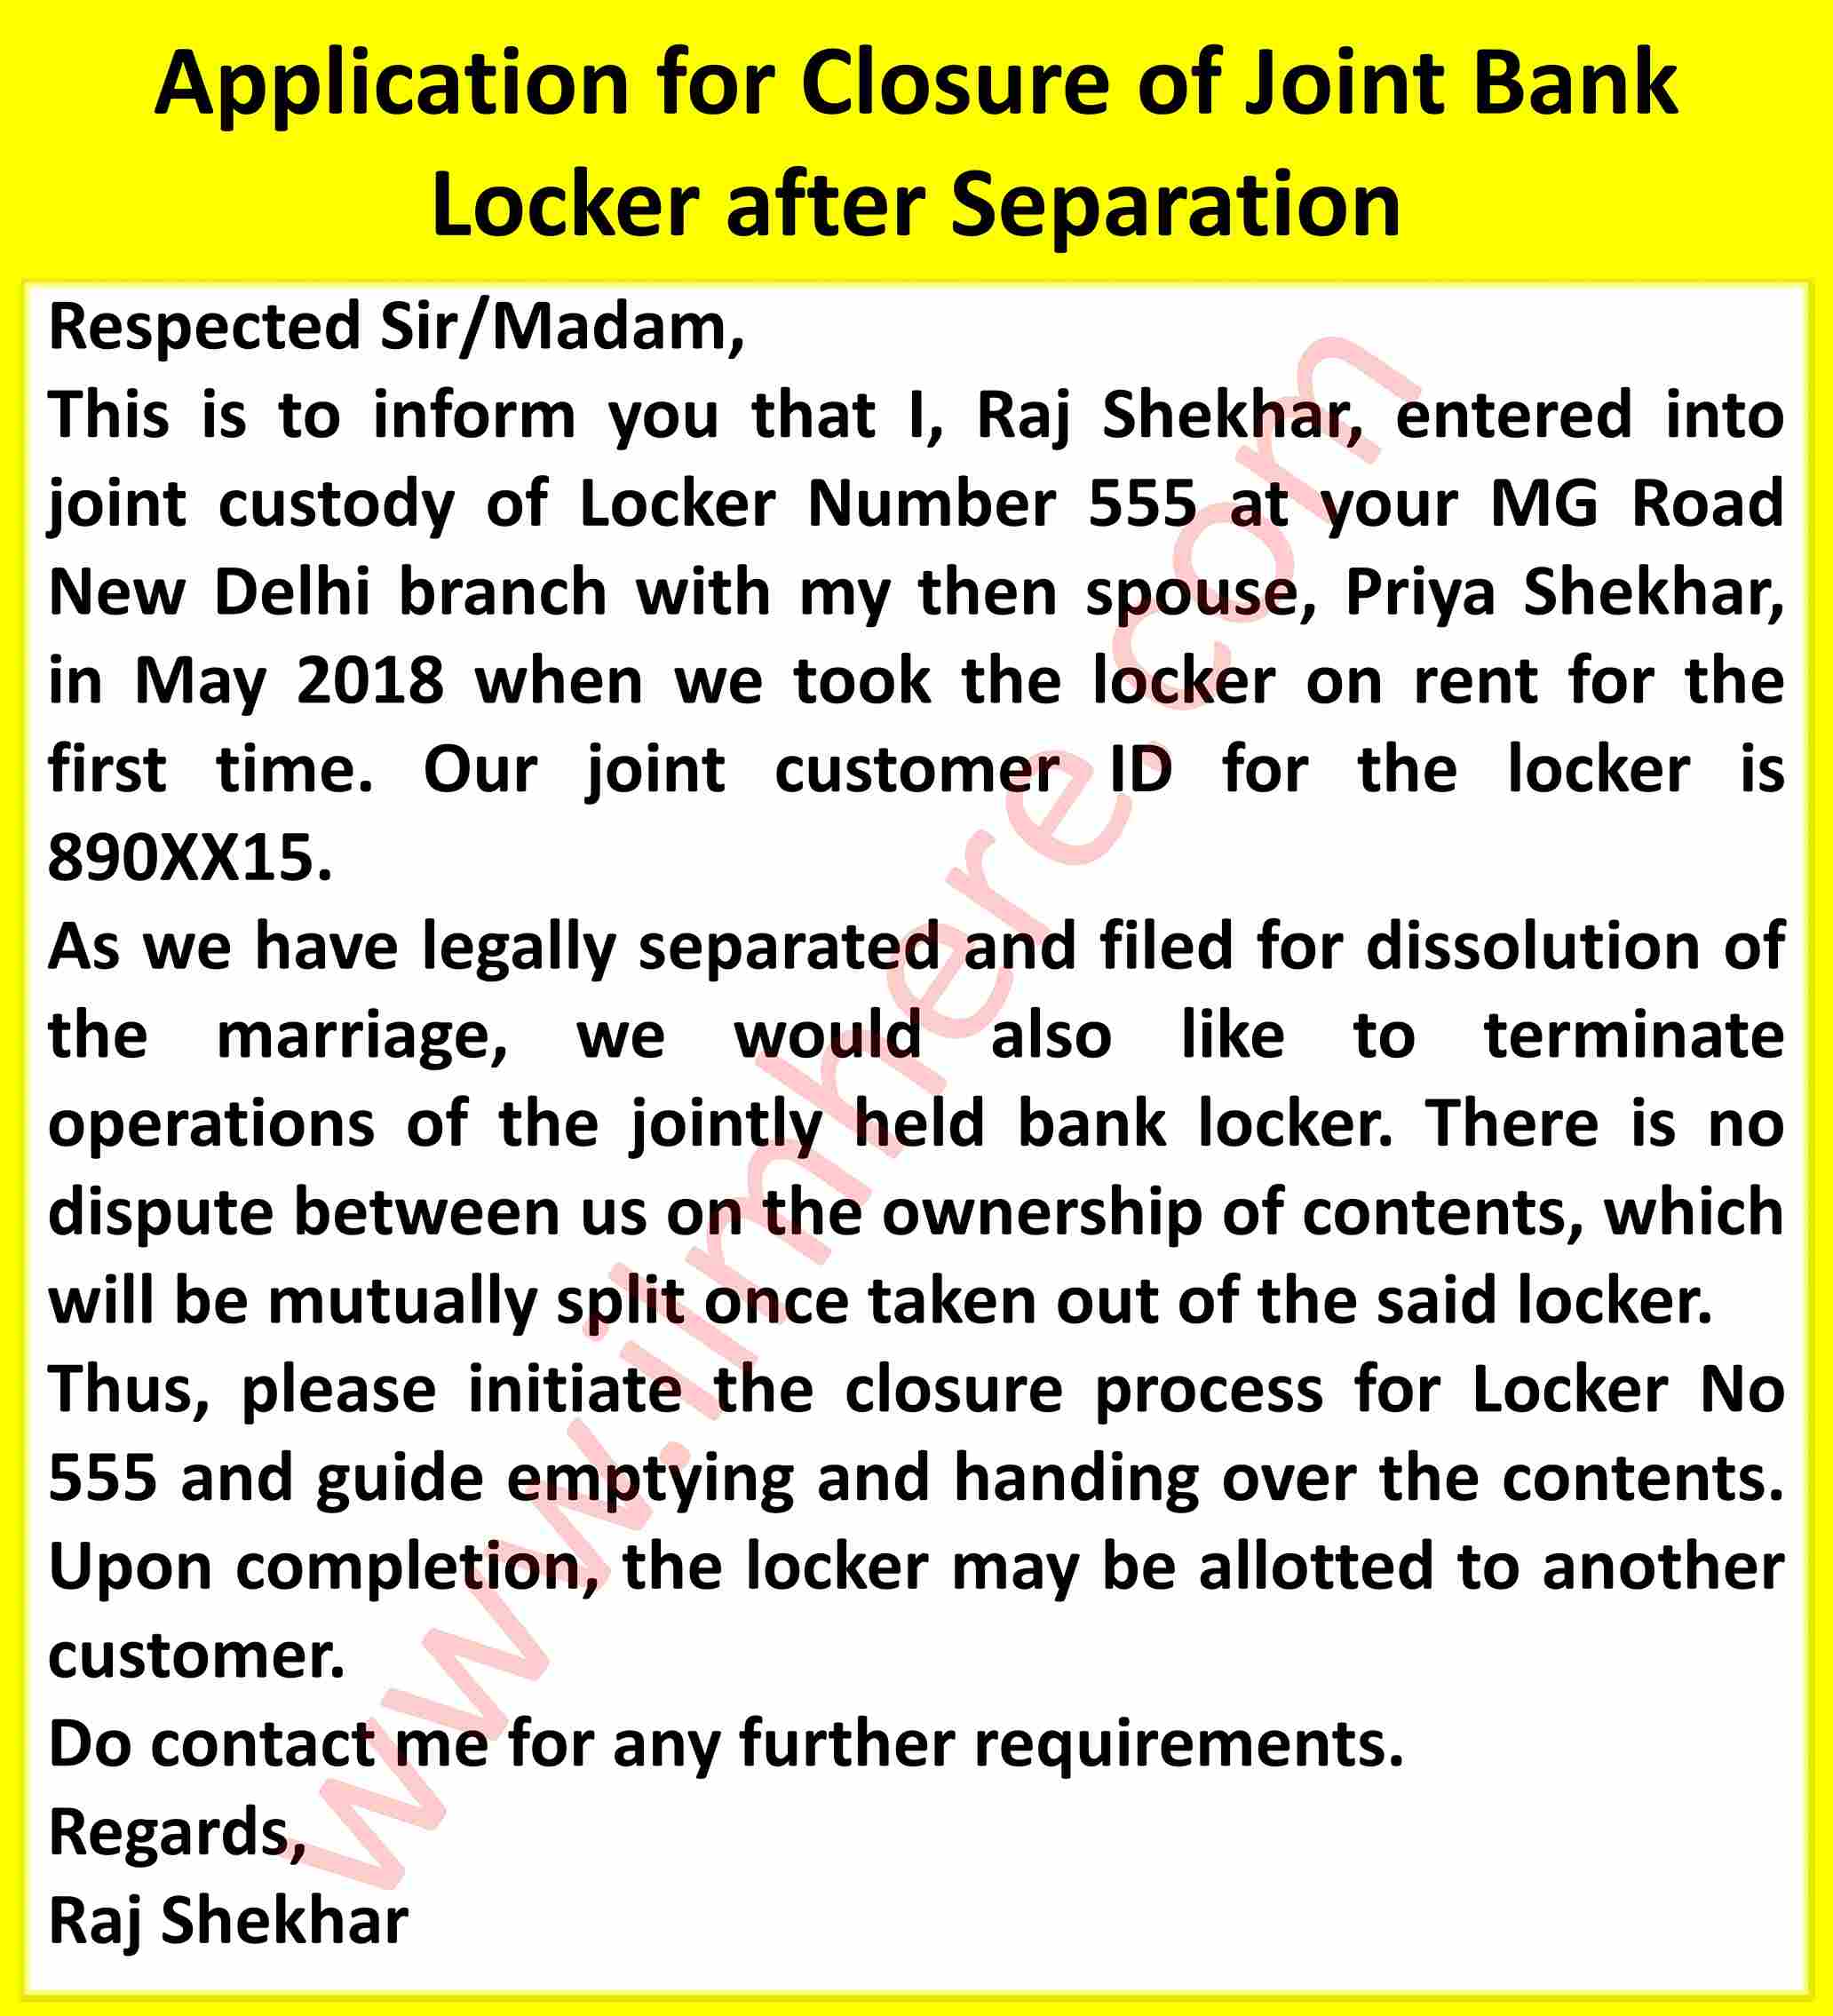 Application for Closure of Joint Bank Locker after Separation